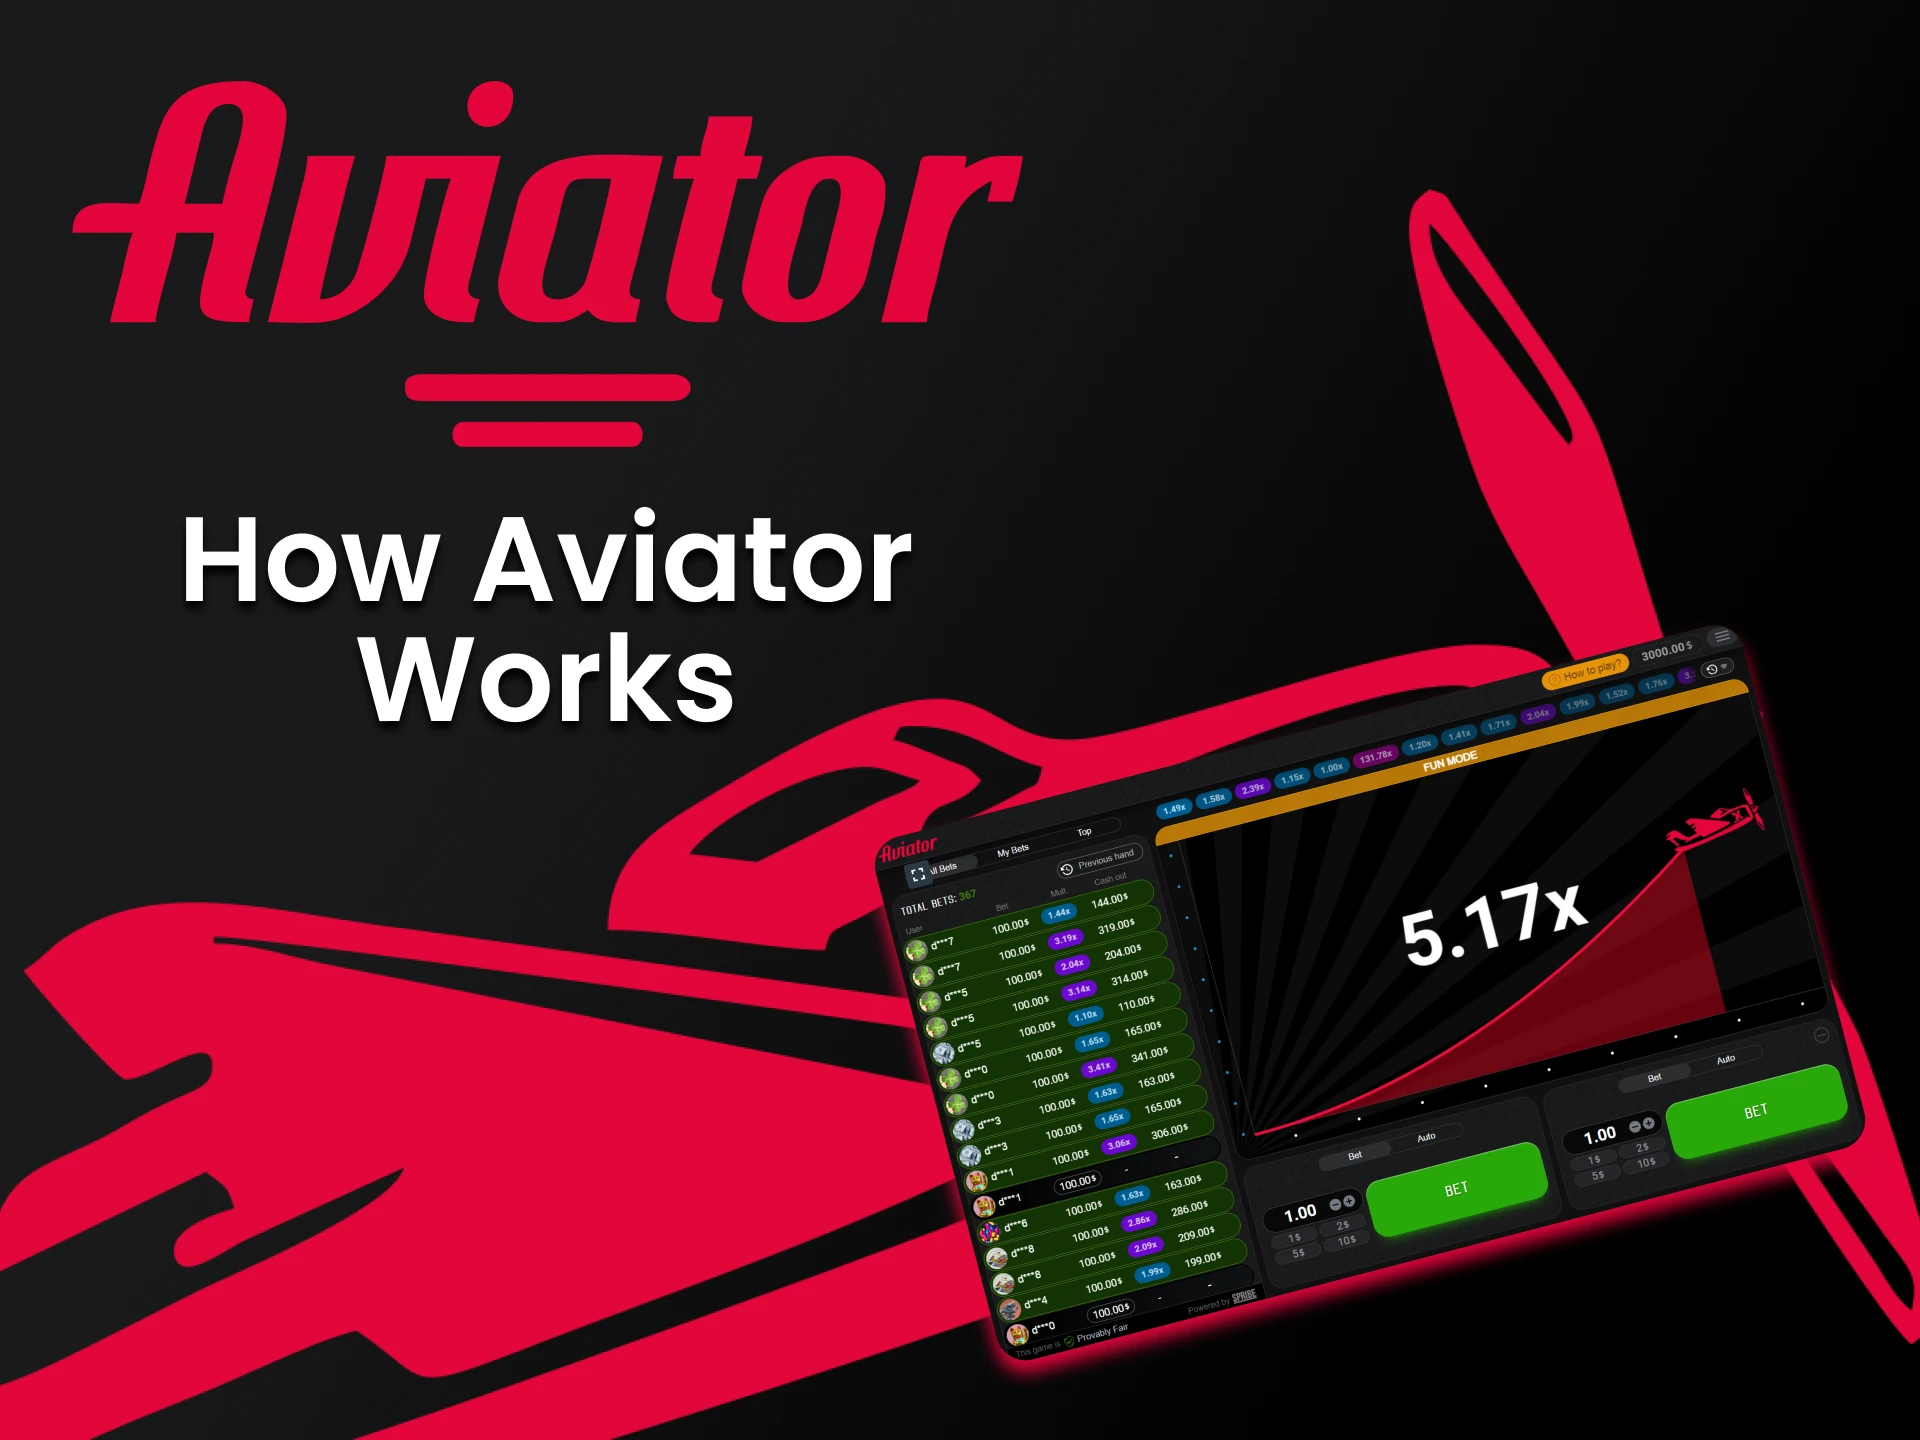 Choose the game Aviator and study the functionality of the game.